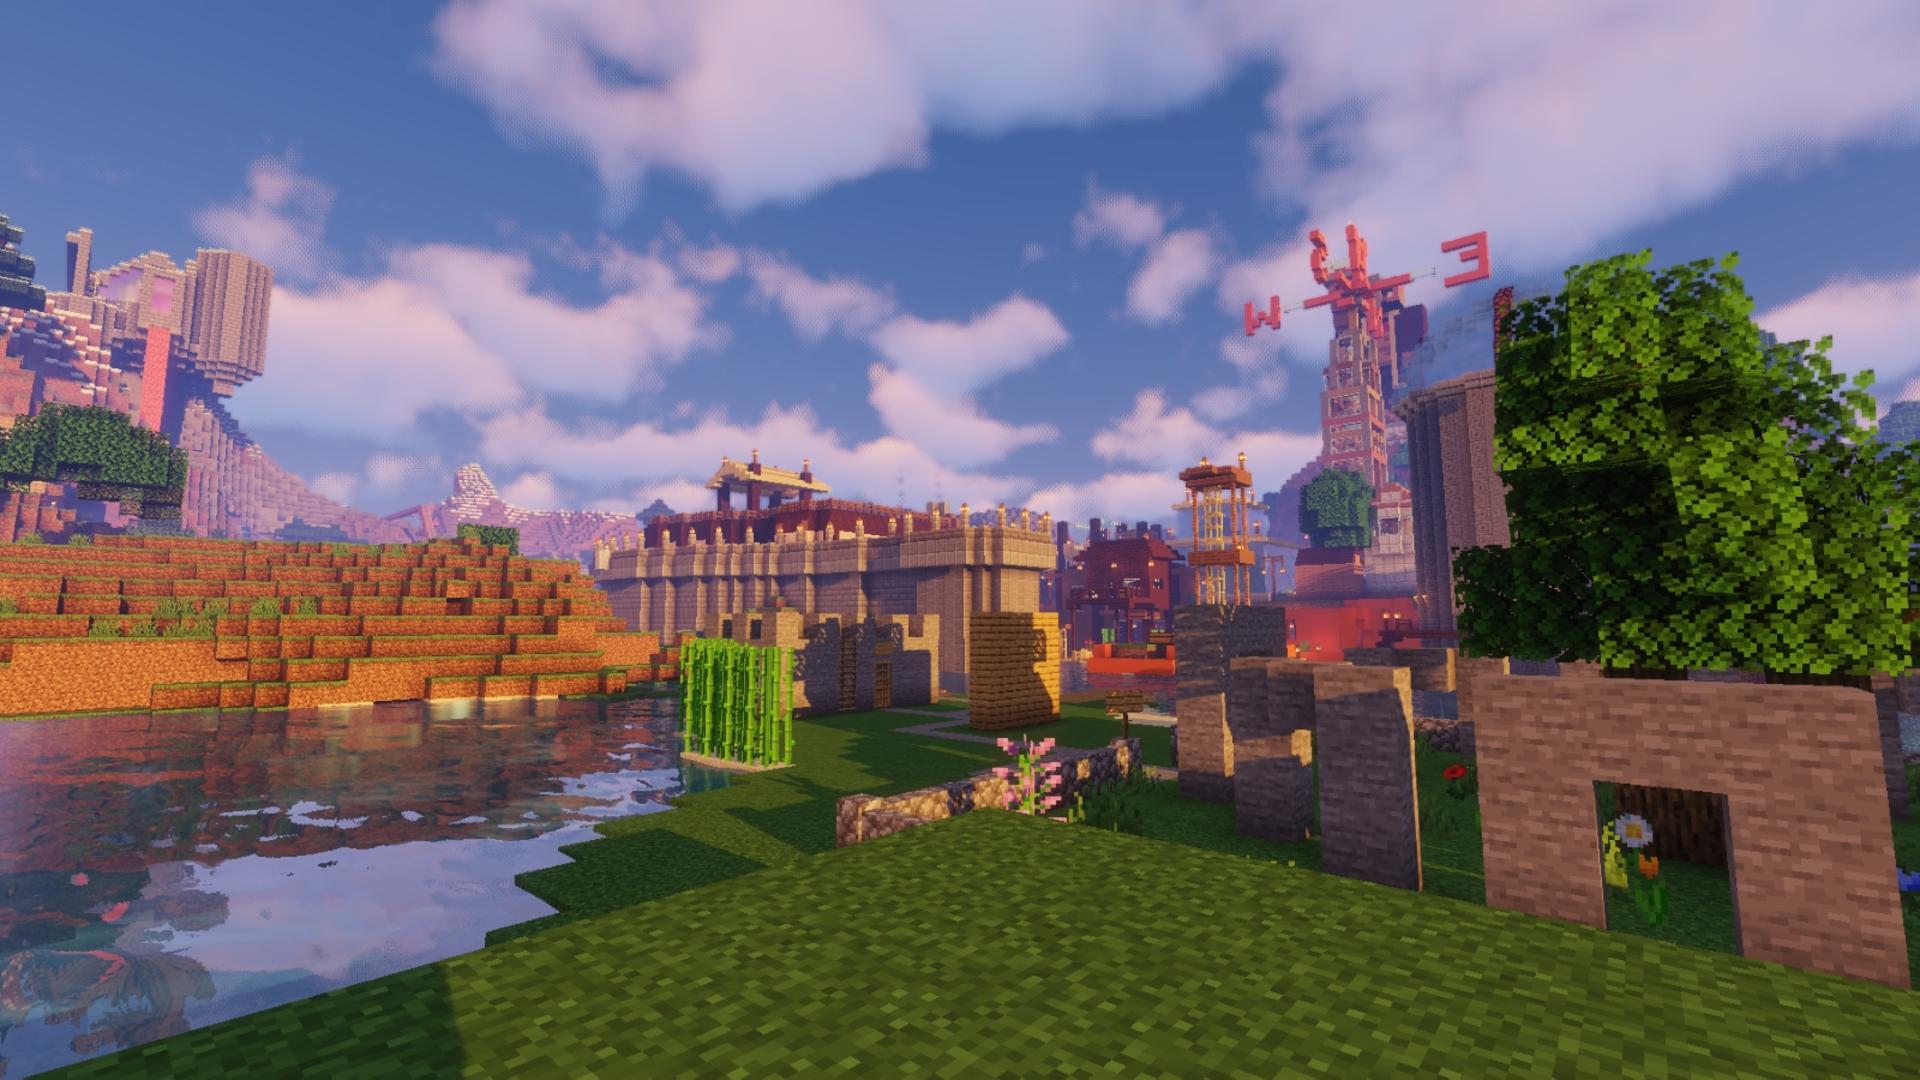 Minecraft is one of the most popular games in the world, image via Mojang